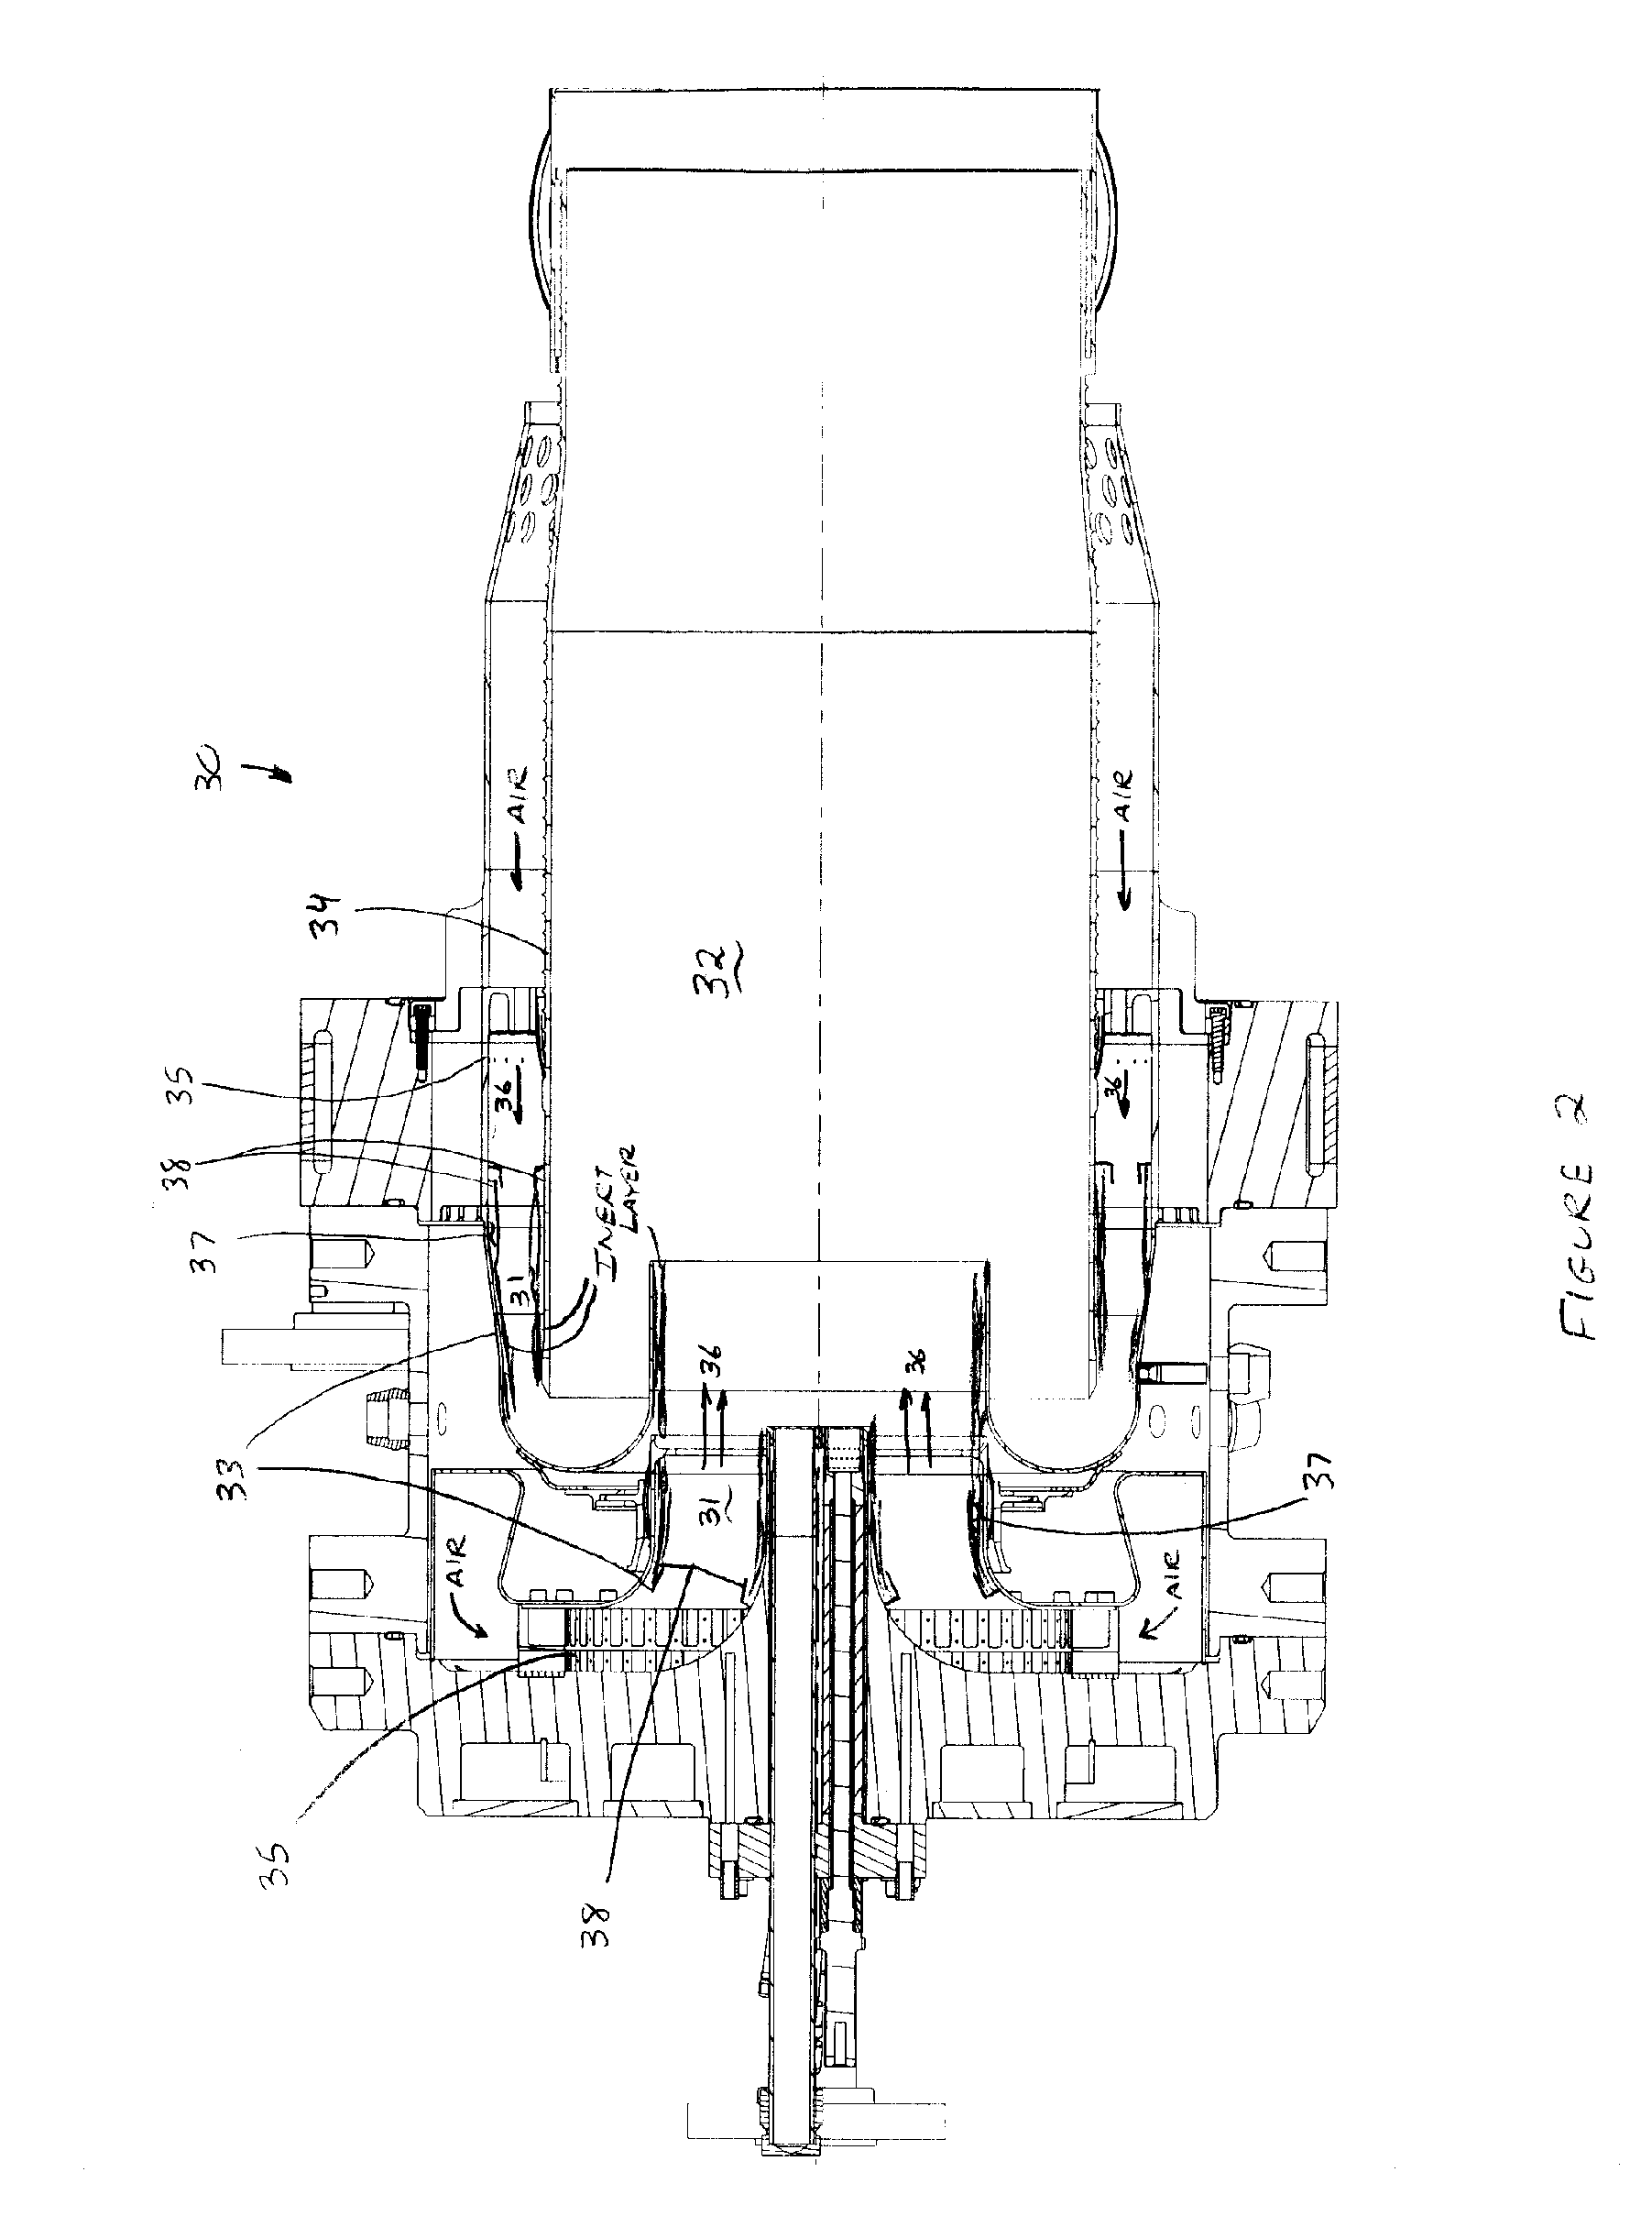 Flashback Suppression System for a Gas Turbine Combustor